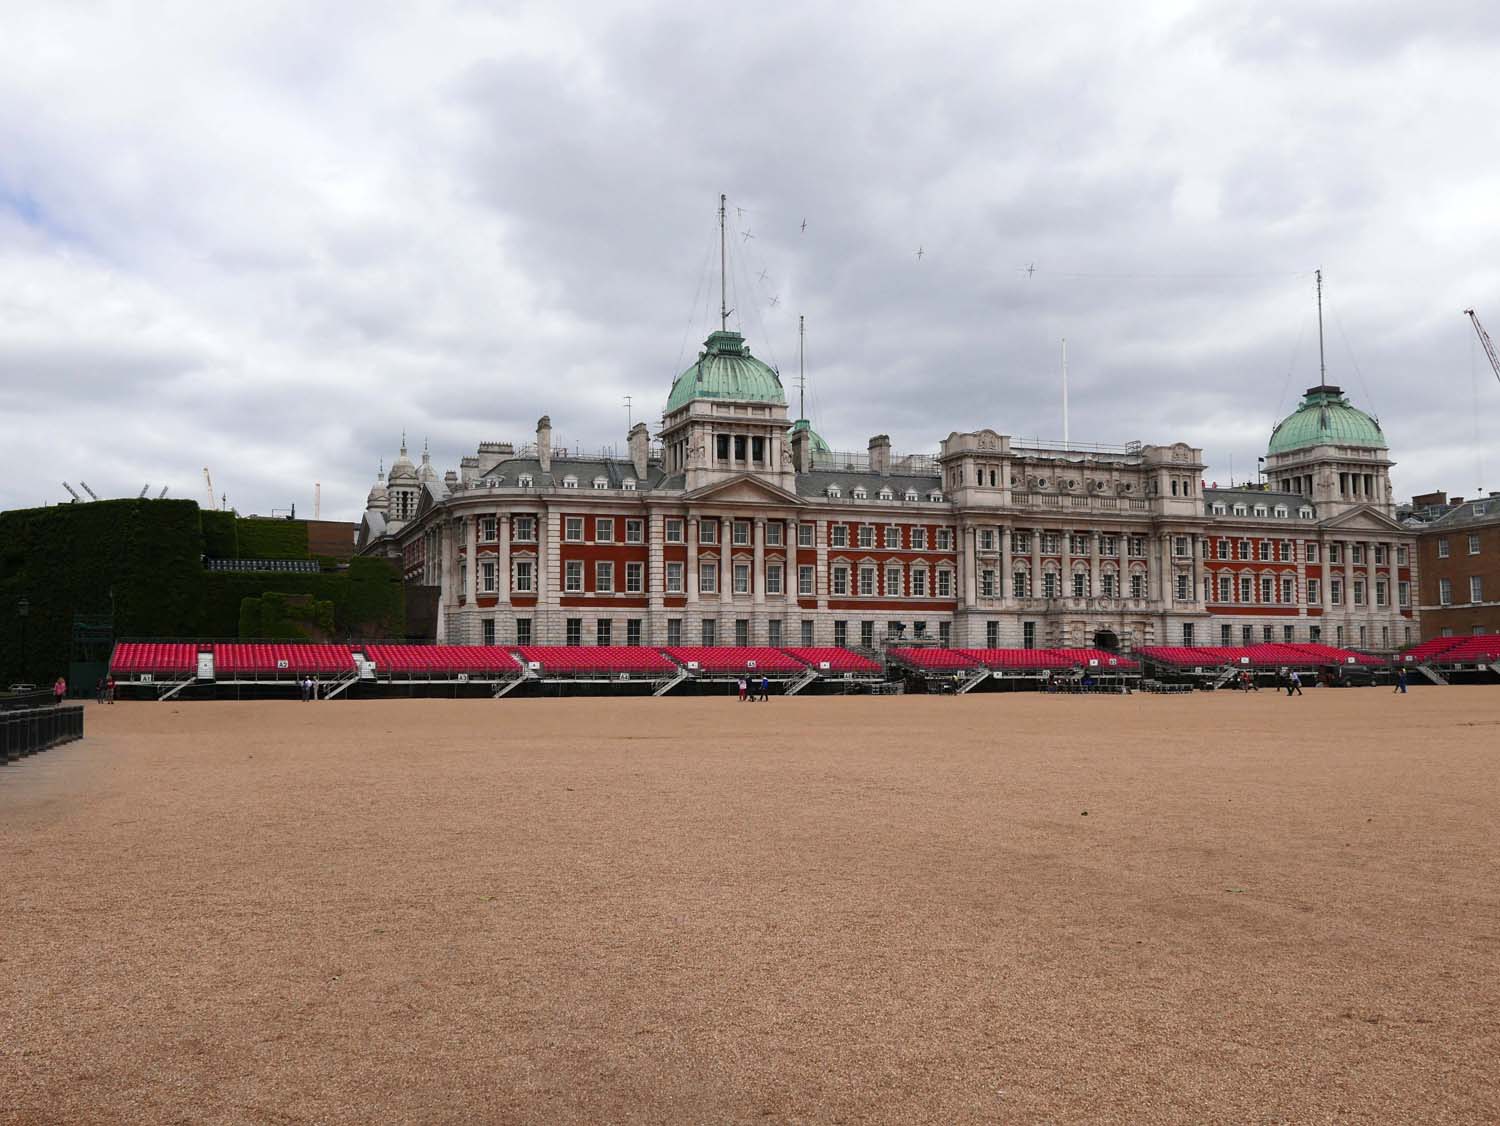 The Horse guard parade grounds